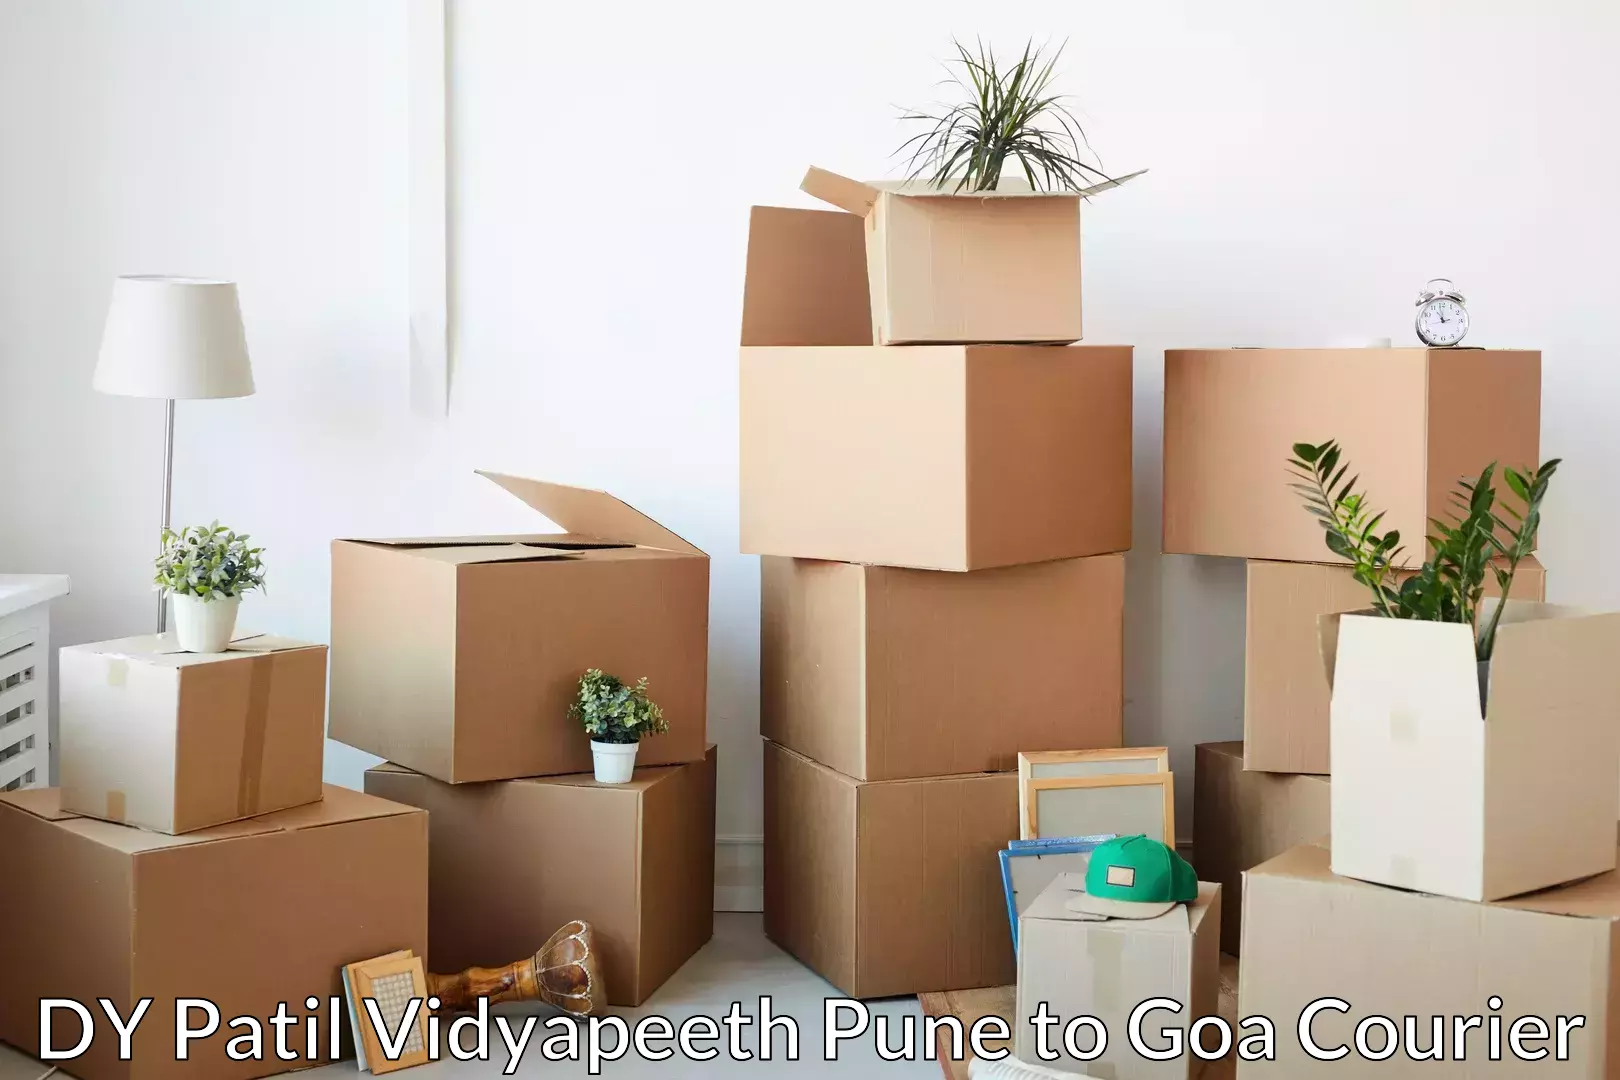 Quality relocation services in DY Patil Vidyapeeth Pune to Panaji